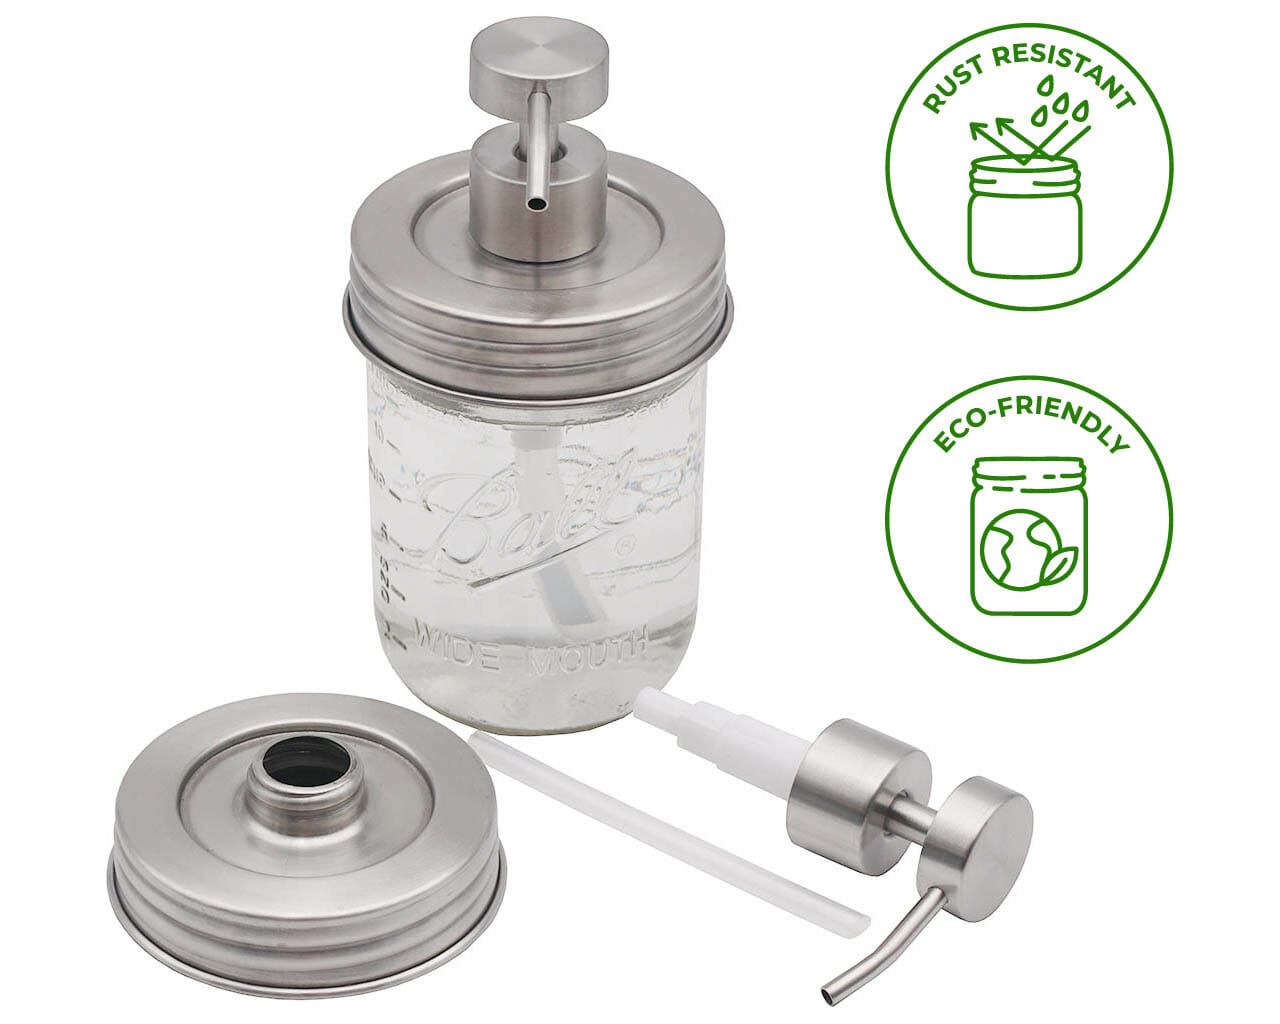 Threaded Brushed Stainless Steel/Matte Satin Soap Dispenser Lid for Wide Mouth Mason Jars Style #2